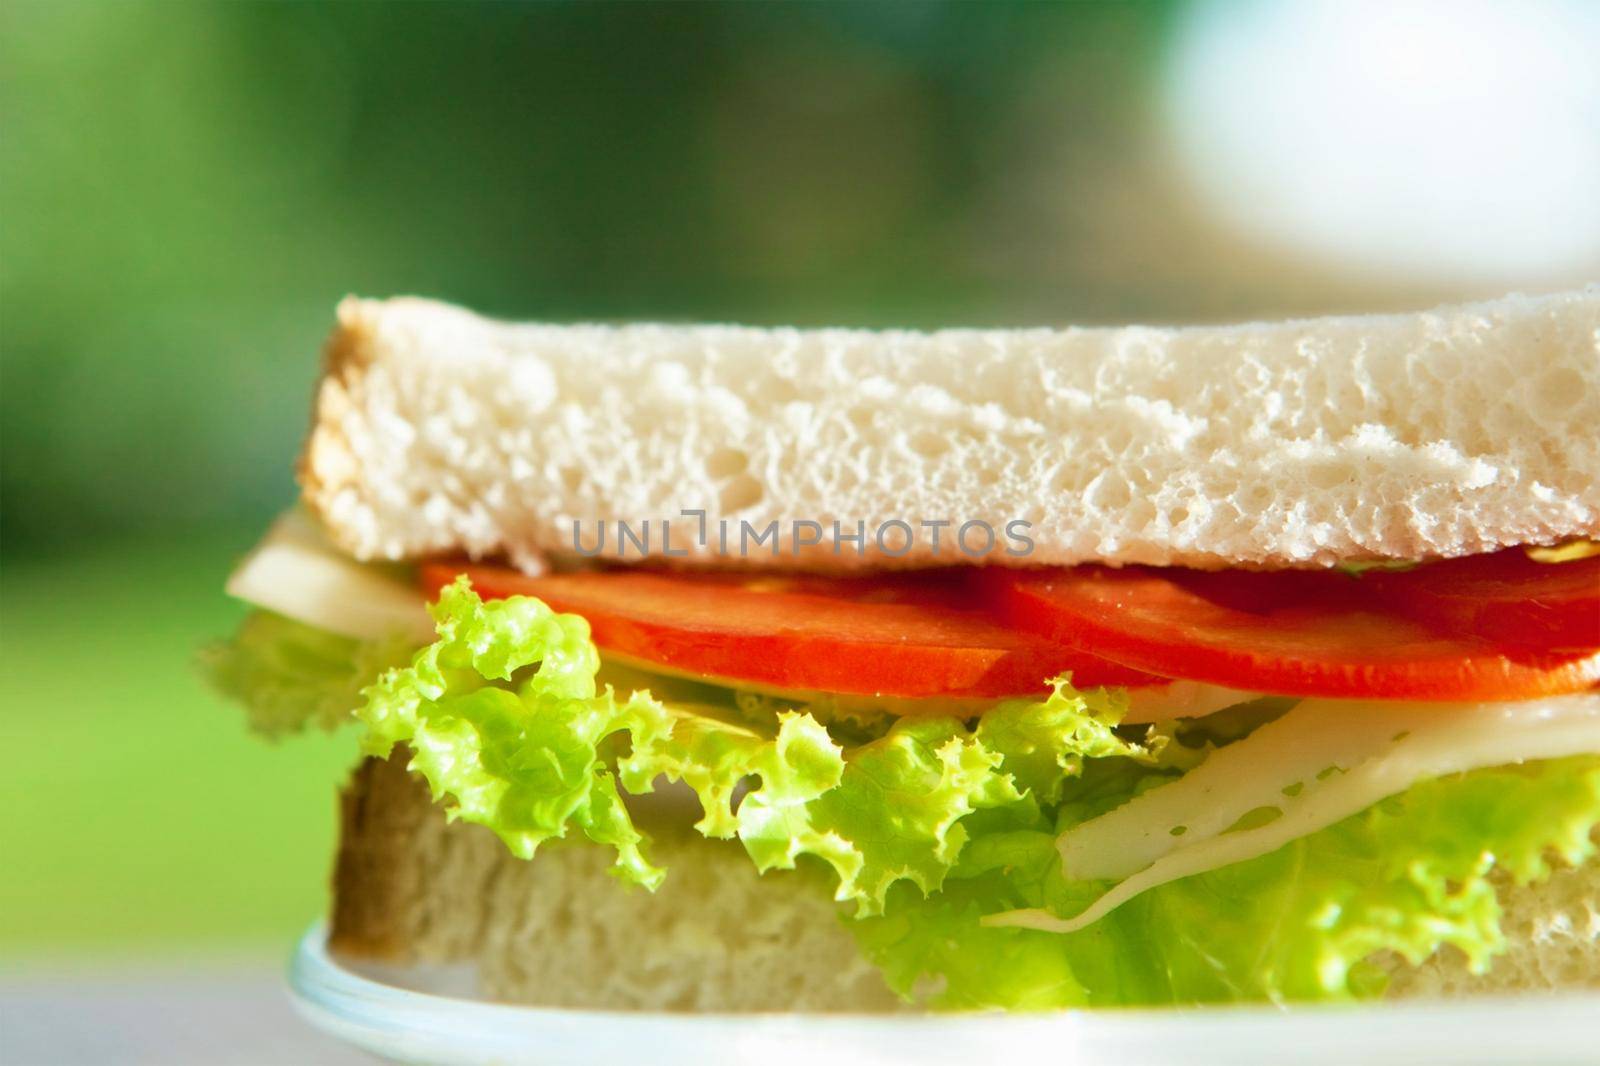 cheese and veggies sandwich - healthy snacks and homemade food styled concept